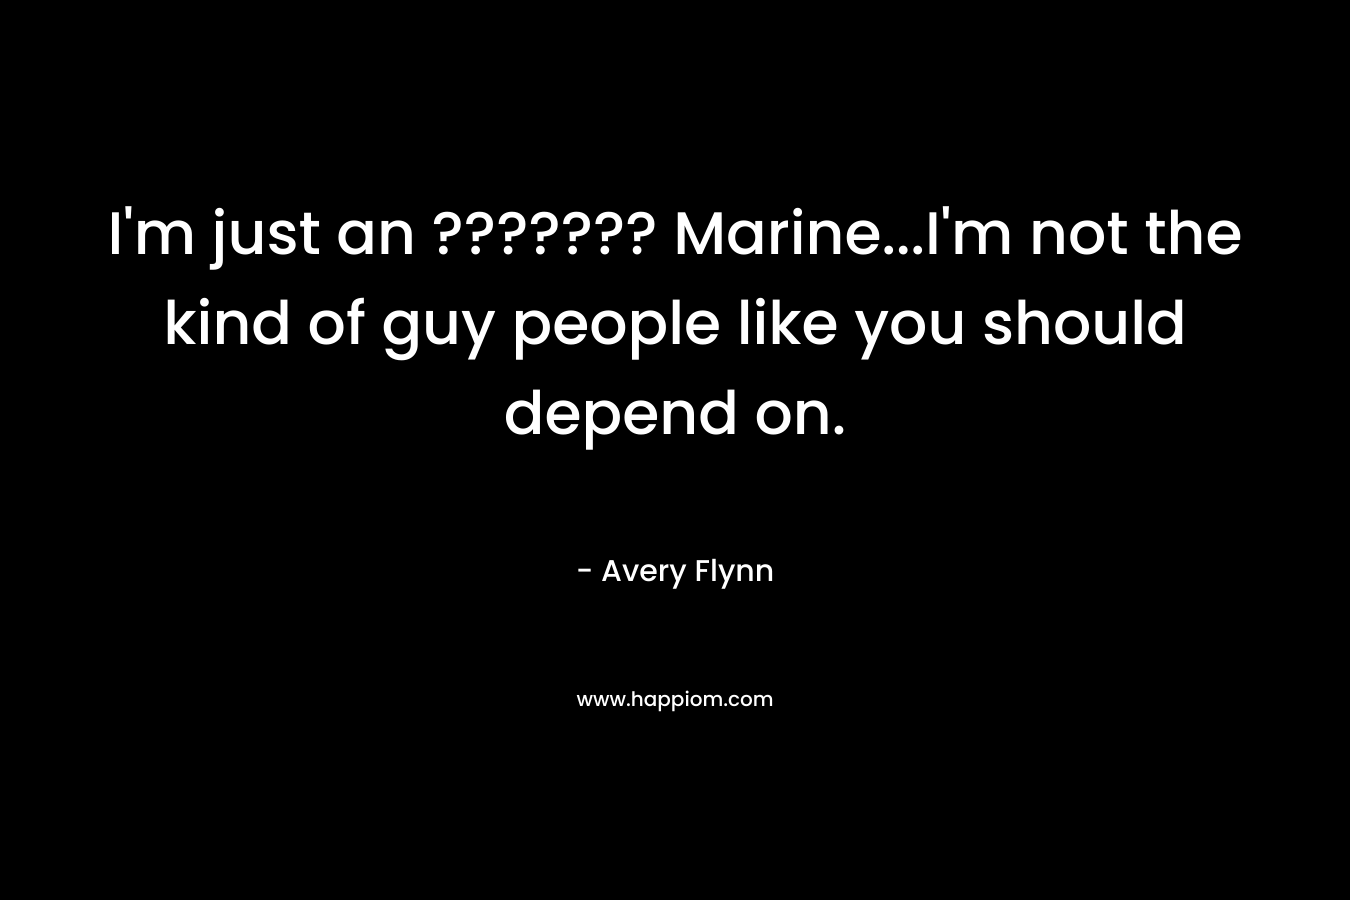 I’m just an ??????? Marine…I’m not the kind of guy people like you should depend on. – Avery Flynn